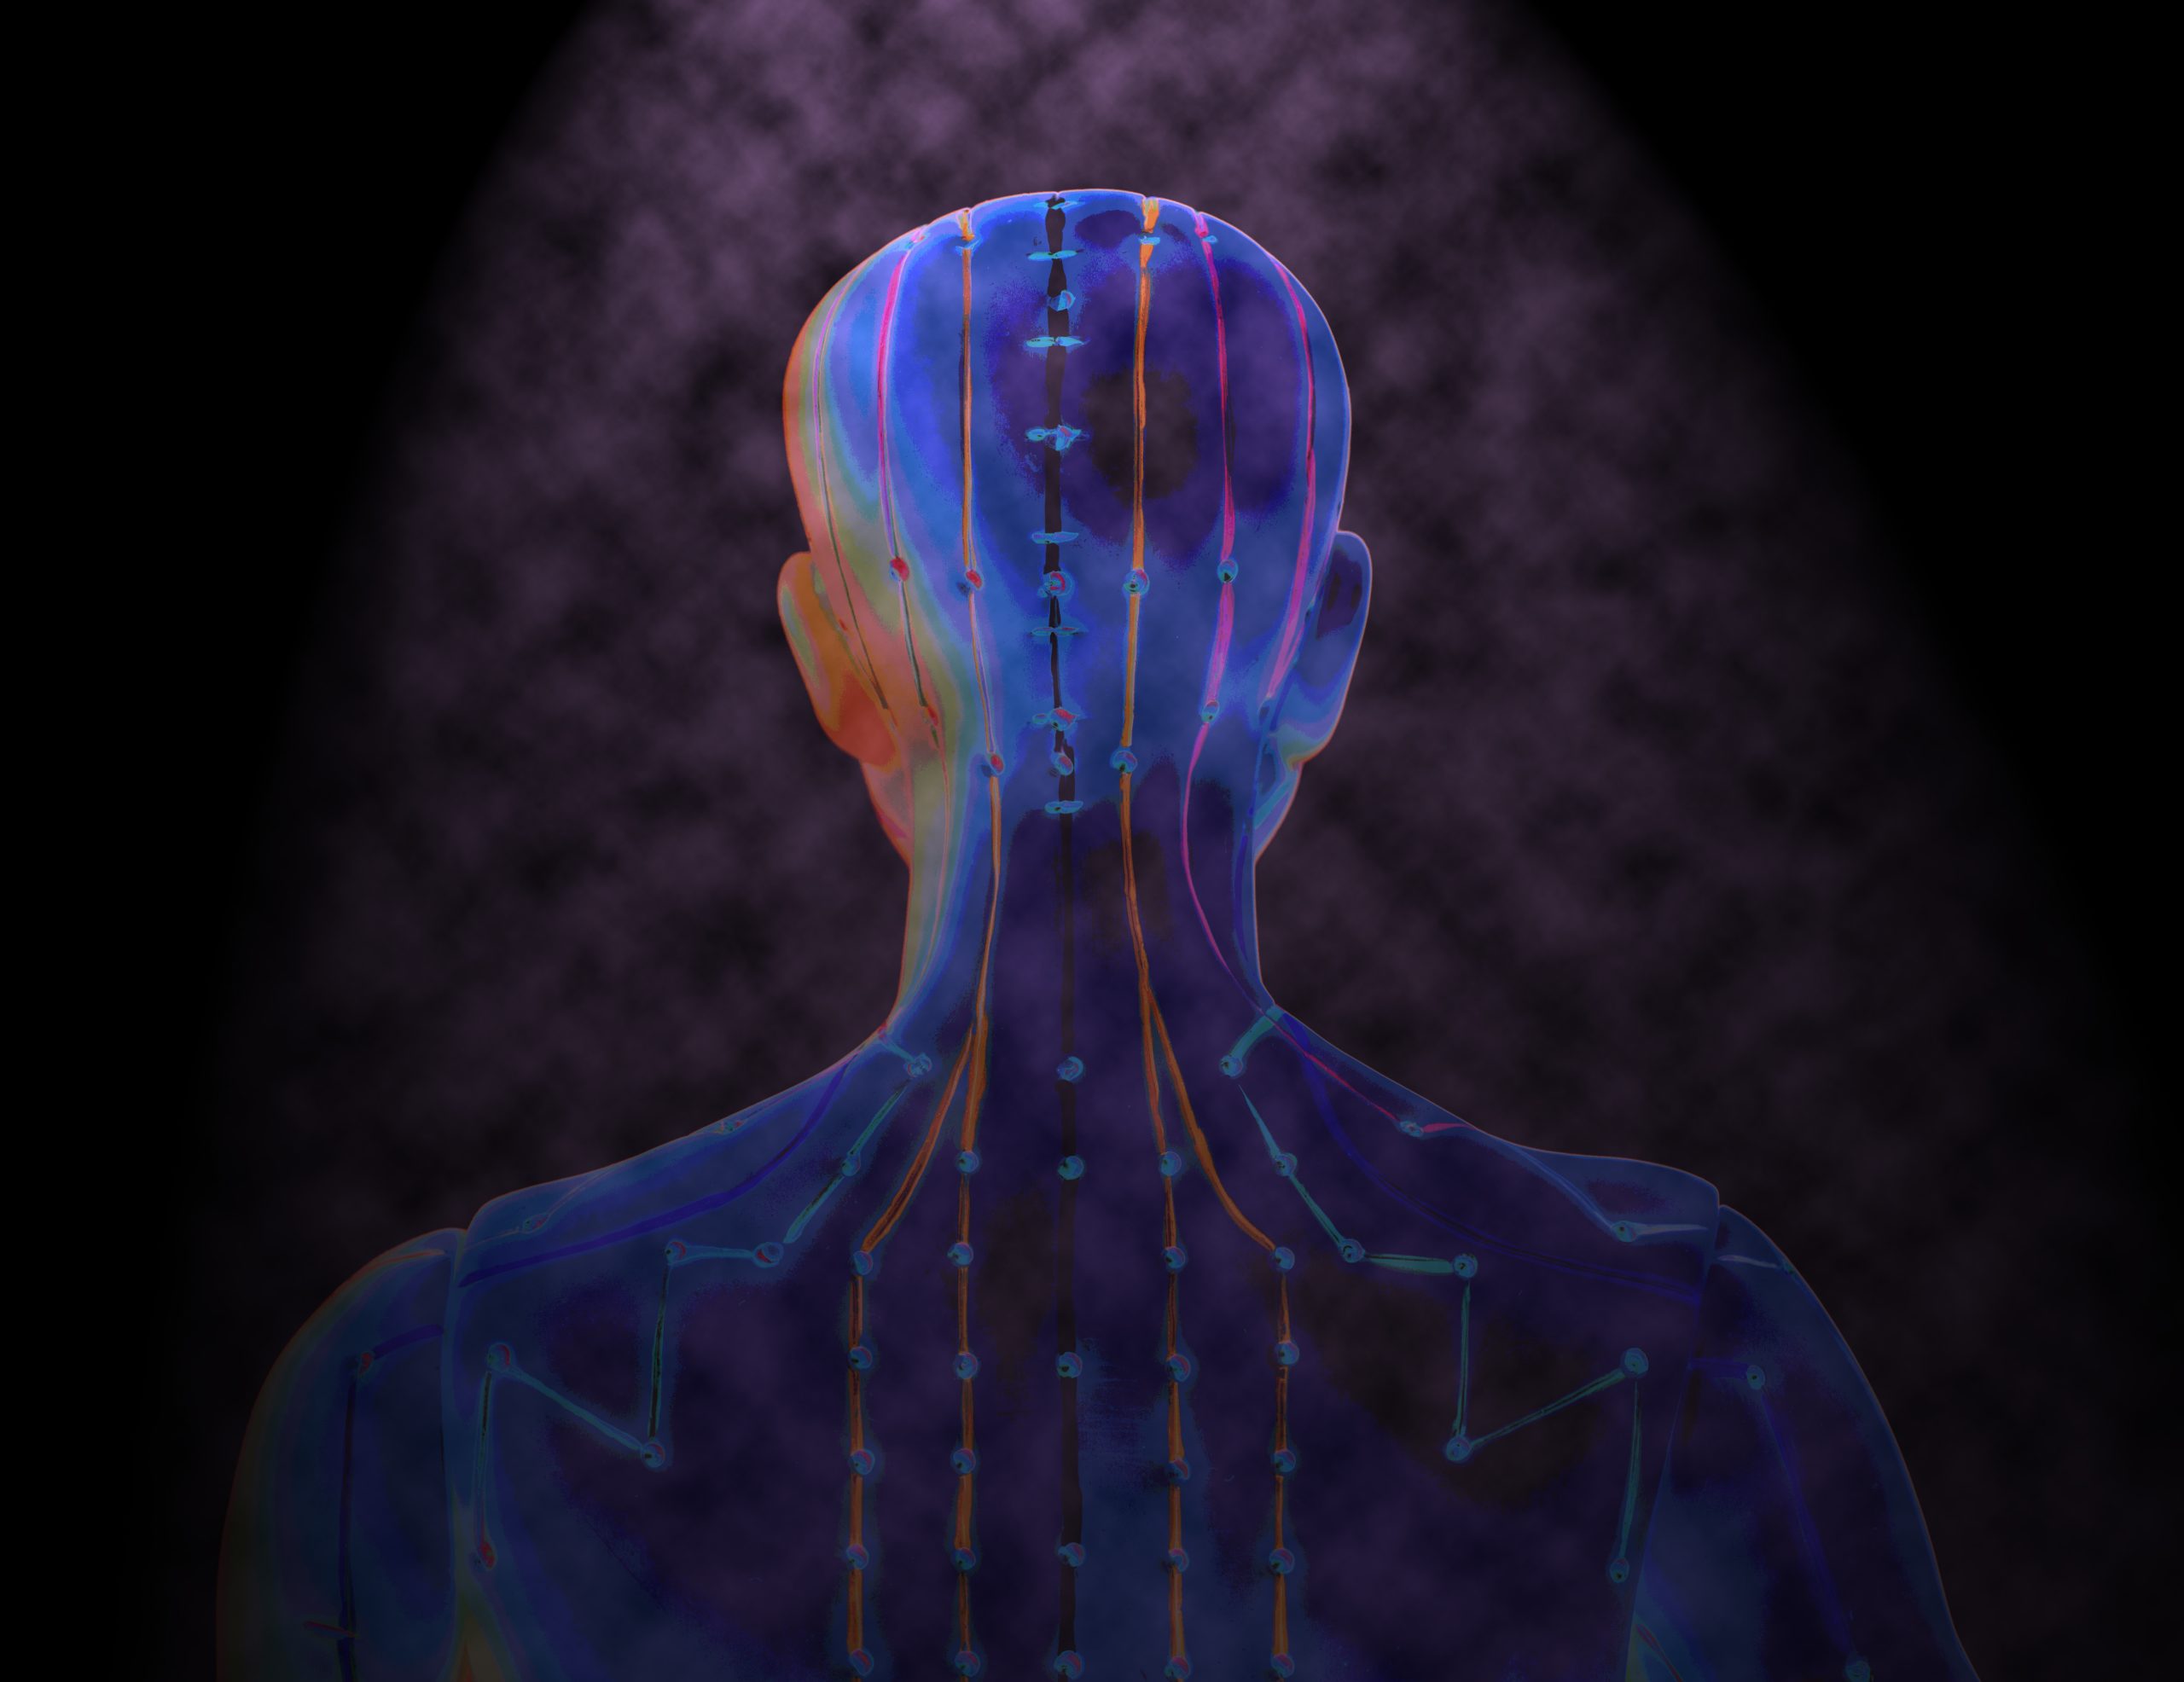 Medical acupuncture model of human on black background